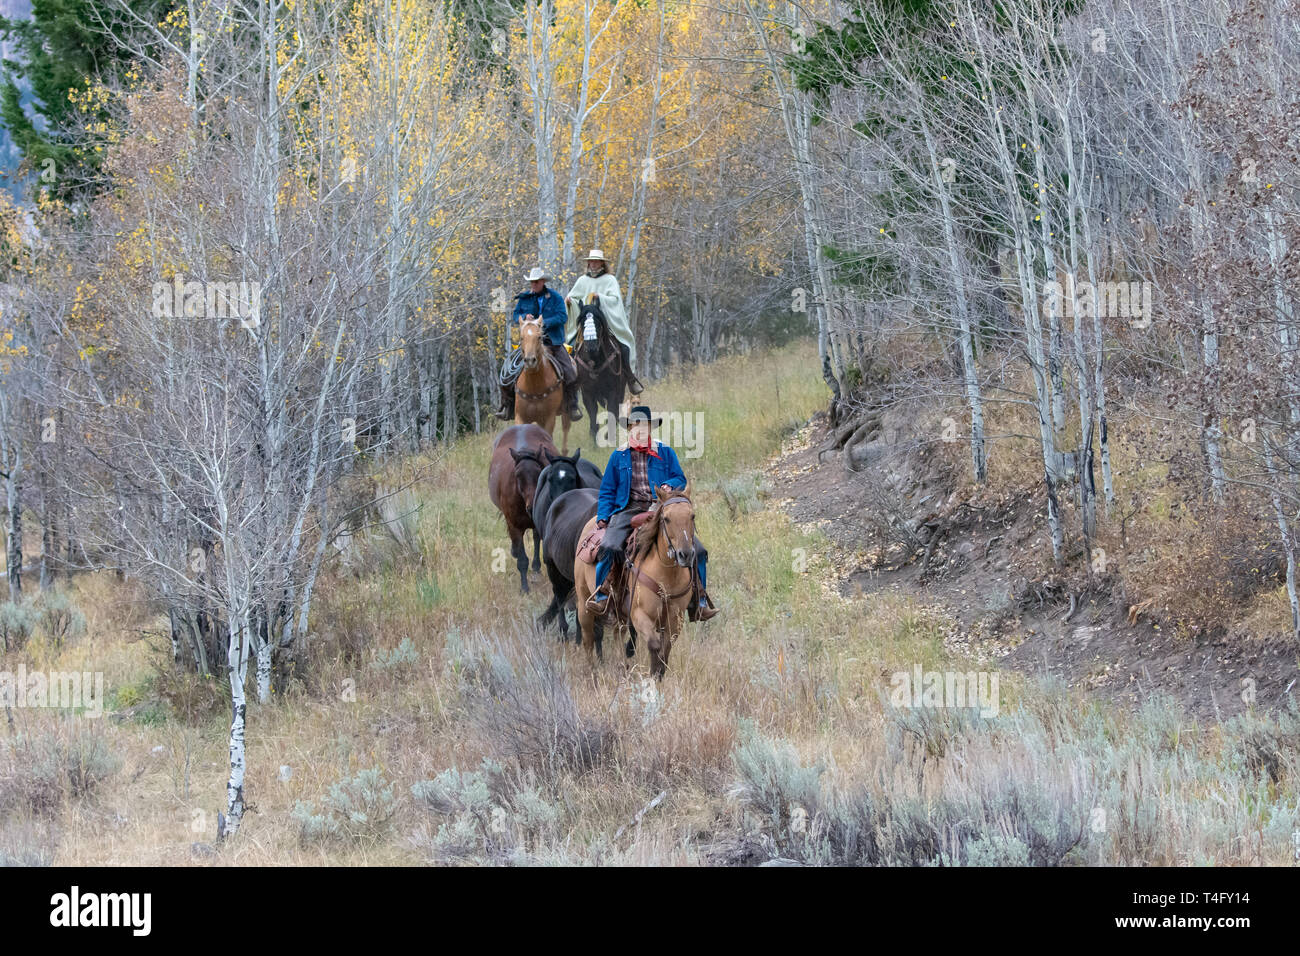 American cowboys and horses in Wyoming Stock Photo